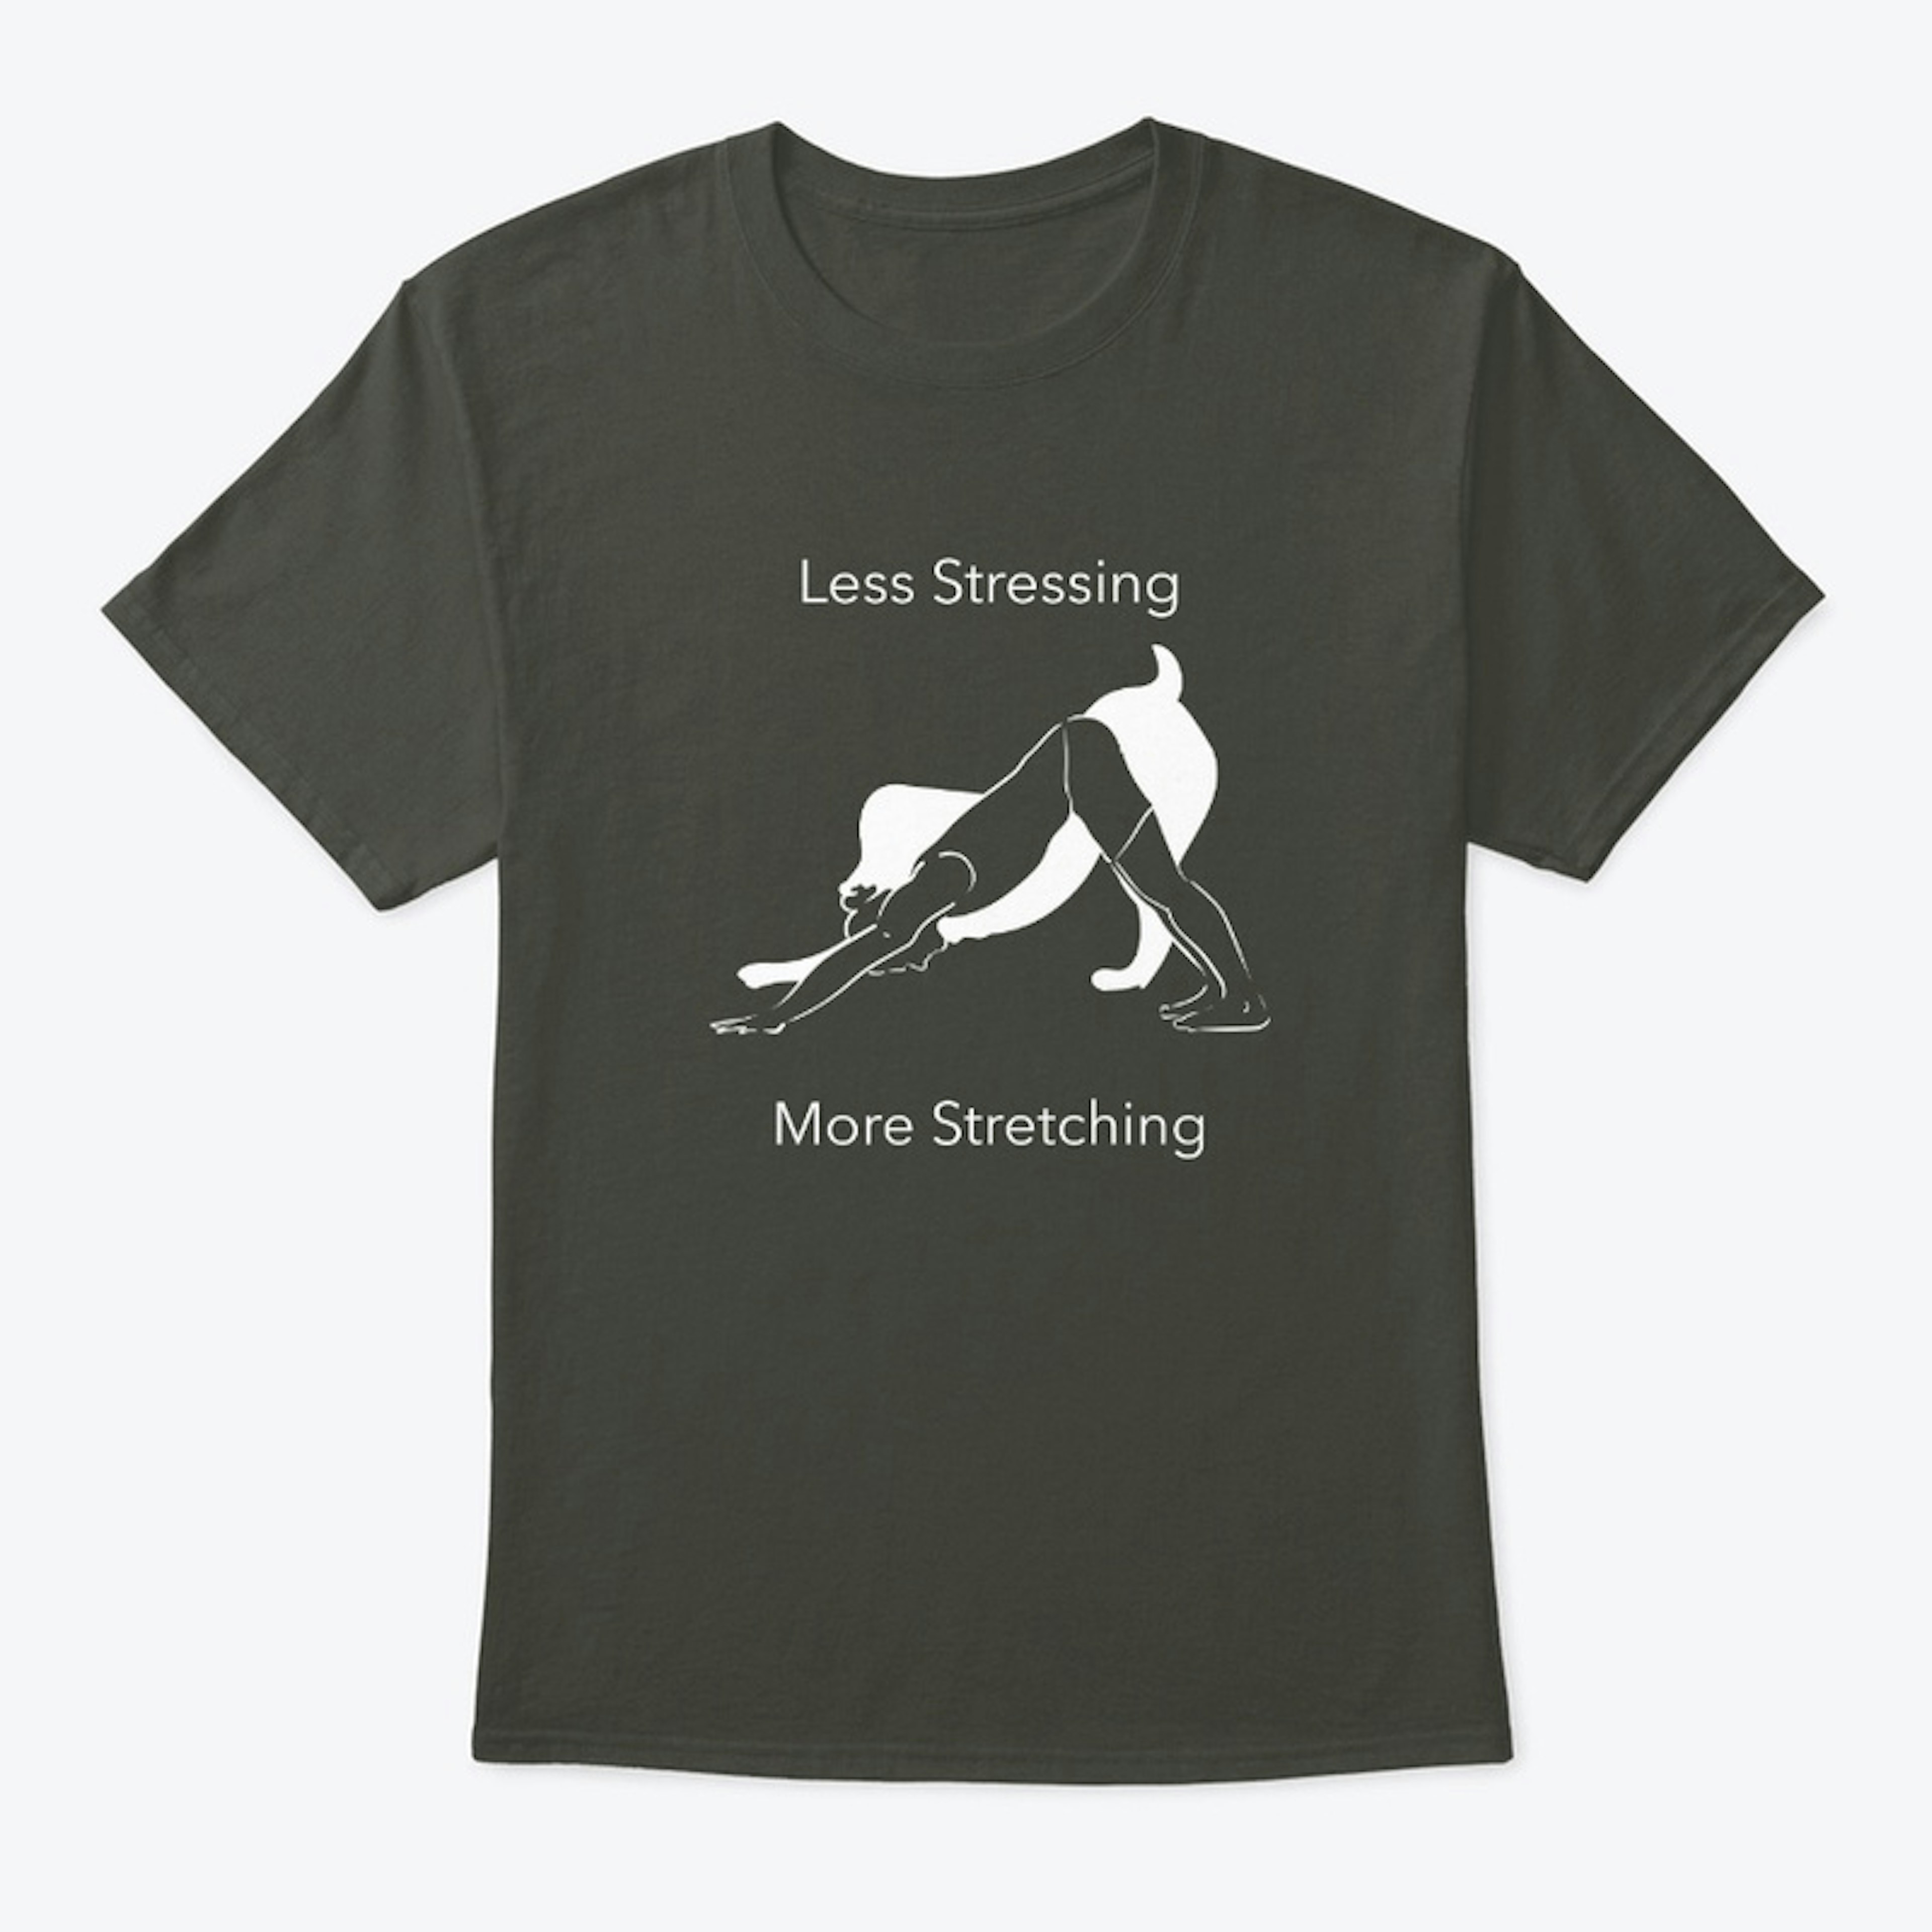 Less Stressing More Stretching